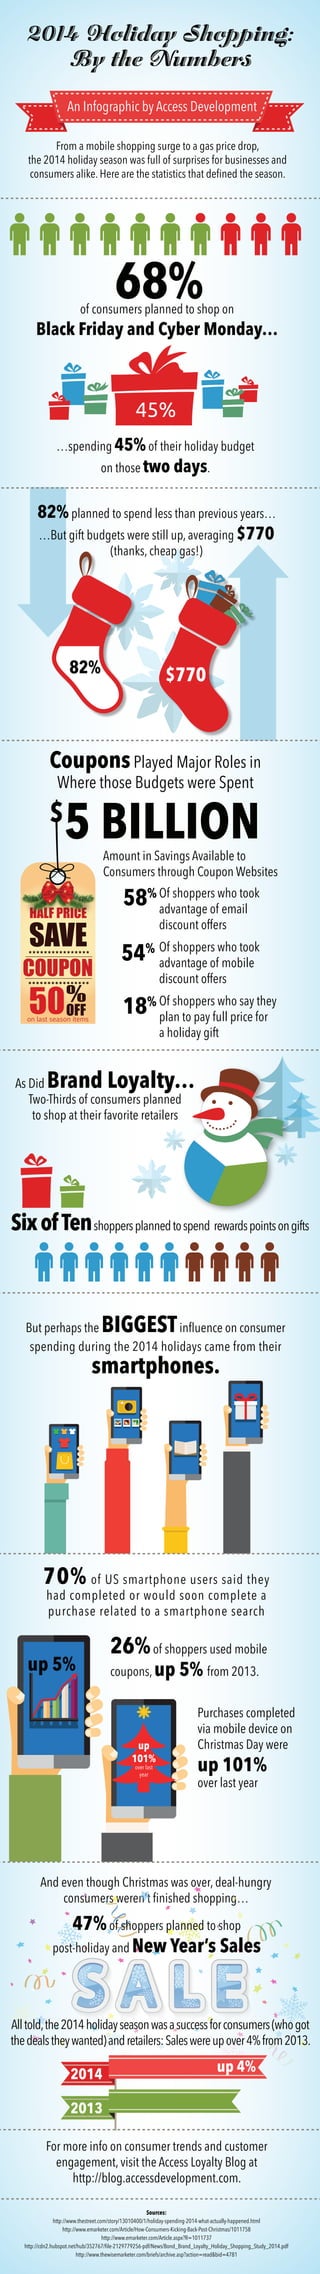 68%
…spending 45%of their holiday budget
on those two days.
2014 Holiday Shopping:
By the Numbers
From a mobile shopping surge to a gas price drop,
the 2014 holiday season was full of surprises for businesses and
consumers alike. Here are the statistics that defined the season.
Of shoppers who took
advantage of email
discount offers
Of shoppers who took
advantage of mobile
discount offers
Of shoppers who say they
plan to pay full price for
a holiday gift
As Did Brand Loyalty…
Two-Thirds of consumers planned
to shop at their favorite retailers
An Infographic by Access Development
58%
$
5 BILLION
Sources:
http://www.thestreet.com/story/13010400/1/holiday-spending-2014-what-actually-happened.html
http://www.emarketer.com/Article/How-Consumers-Kicking-Back-Post-Christmas/1011758
http://www.emarketer.com/Article.aspx?R=1011737
http://cdn2.hubspot.net/hub/352767/file-2129779256-pdf/News/Bond_Brand_Loyalty_Holiday_Shopping_Study_2014.pdf
http://www.thewisemarketer.com/briefs/archive.asp?action=read&bid=4781
of consumers planned to shop on
Black Friday and Cyber Monday…
82% $770
82%planned to spend less than previous years…
…But gift budgets were still up, averaging $770
(thanks, cheap gas!)
CouponsPlayed Major Roles in
Where those Budgets were Spent
Amount in Savings Available to
Consumers through Coupon Websites
18%
54%
SixofTenshoppersplannedtospend rewardspointsongifts
But perhaps the BIGGESTinfluence on consumer
spending during the 2014 holidays came from their
smartphones.
70% of US smartphone users said they
had completed or would soon complete a
purchase related to a smartphone search
26%of shoppers used mobile
coupons, up 5% from 2013.up 5%
And even though Christmas was over, deal-hungry
consumers weren’t finished shopping…
up
101%
over last
year
Purchases completed
via mobile device on
Christmas Day were
up 101%
over last year
For more info on consumer trends and customer
engagement, visit the Access Loyalty Blog at
http://blog.accessdevelopment.com.
47%of shoppers planned to shop
post-holiday and New Year’s Sales
2014
2013
up 4%
Alltold,the2014holidayseasonwasasuccessforconsumers(whogot
thedealstheywanted)andretailers:Saleswereupover4%from2013.
 